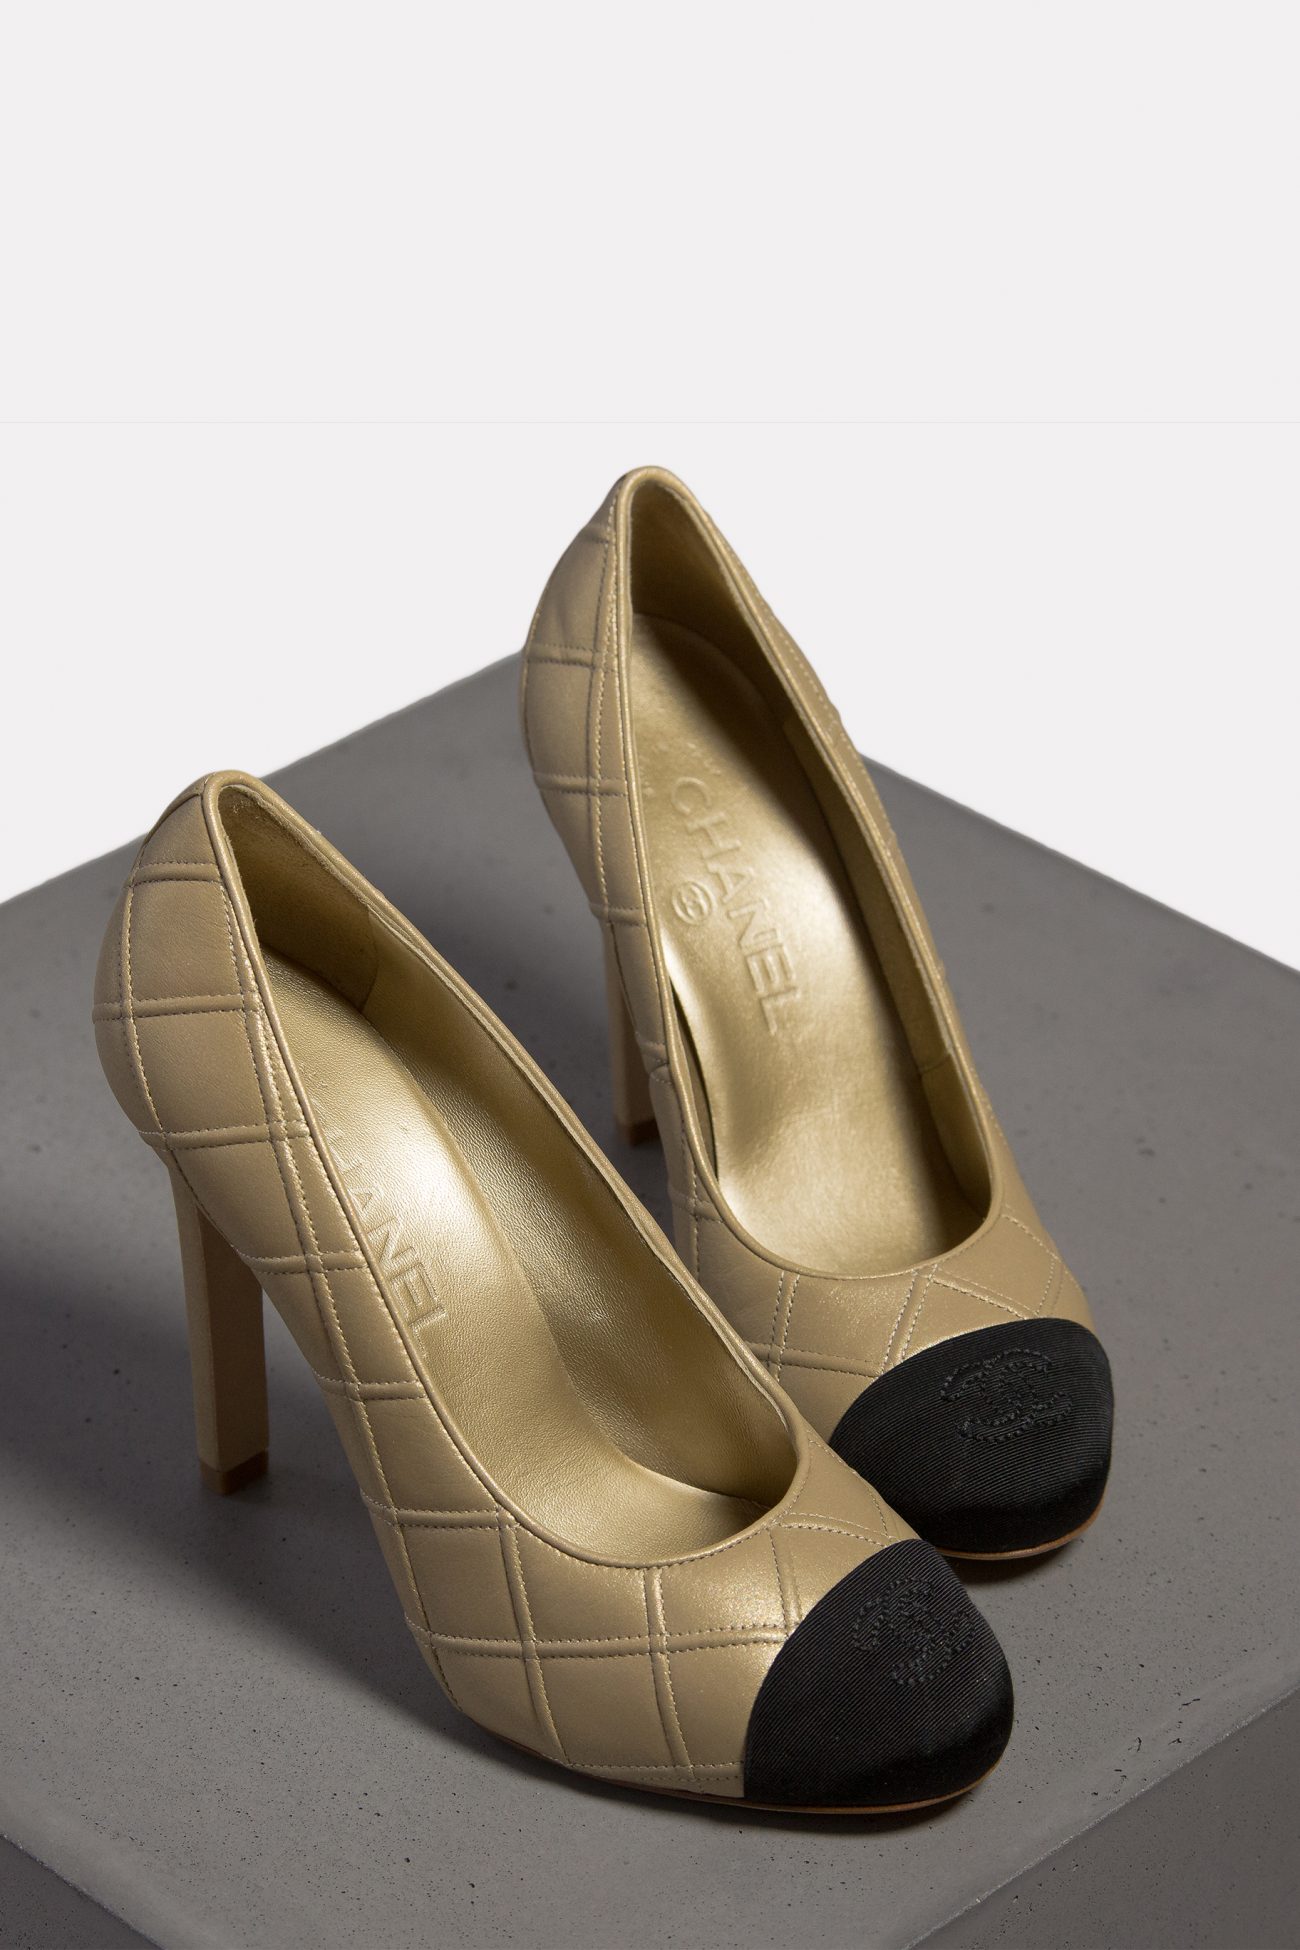 Chanel Shoes,  - Huntessa Luxury Online Consignment Boutique